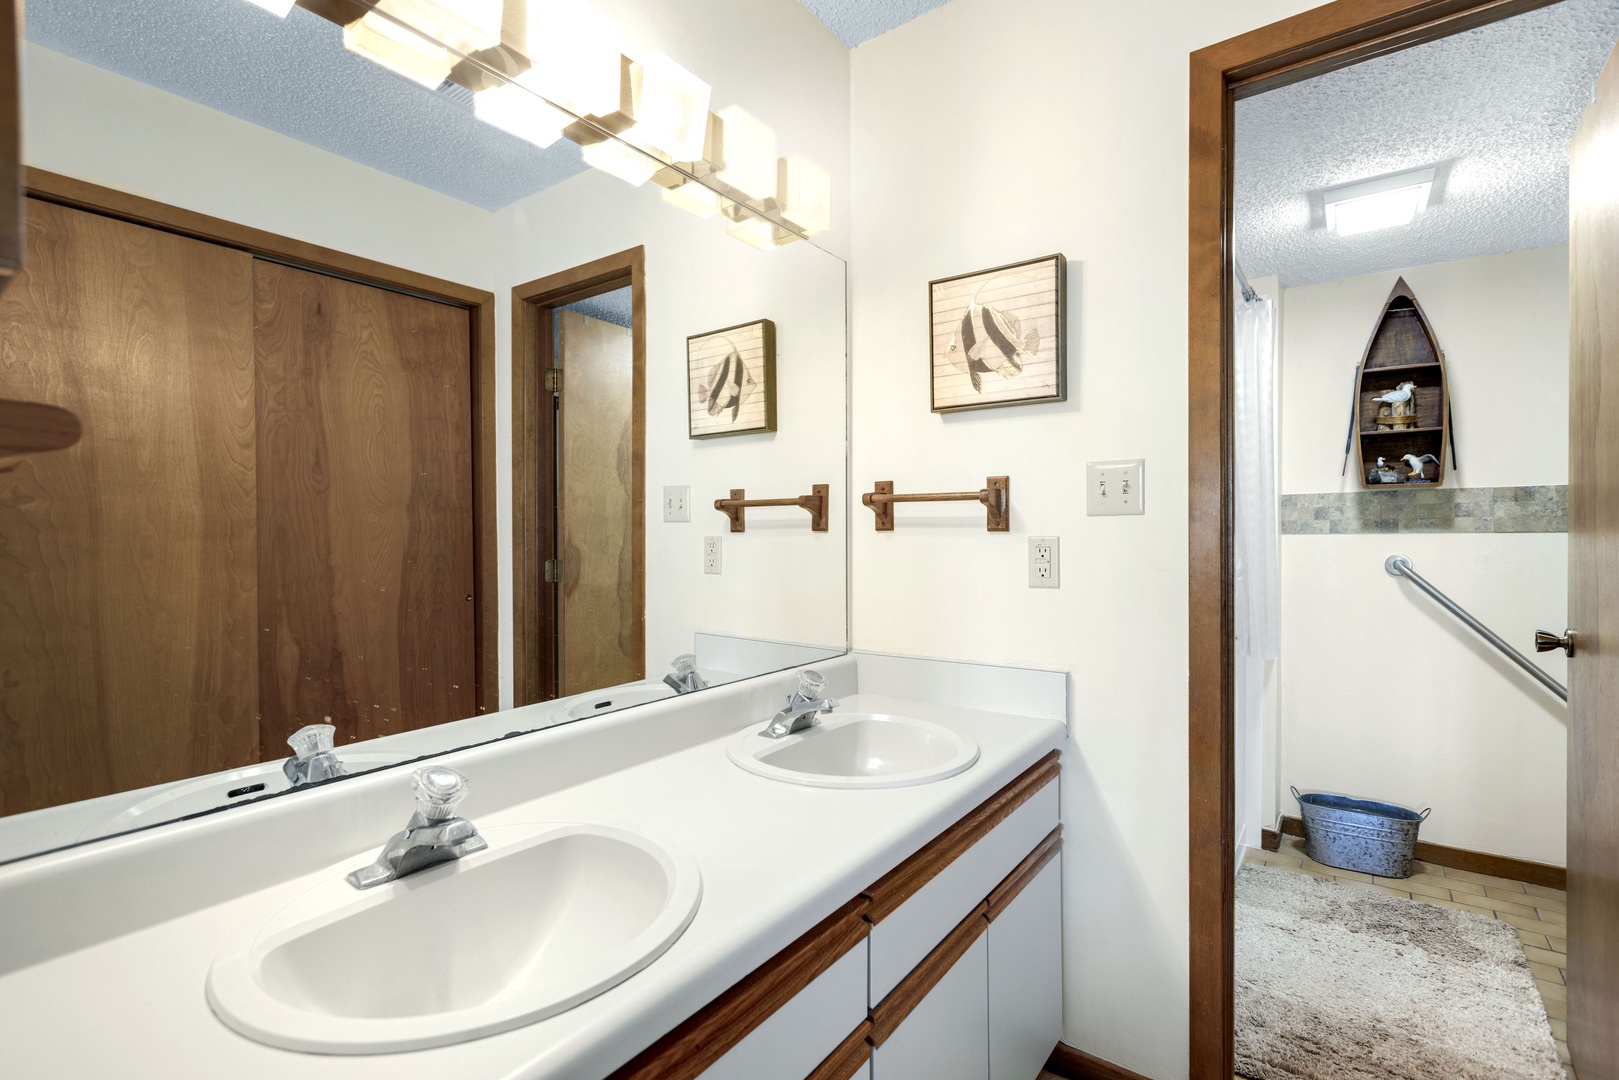 Primary ensuite features double vanity, walk-in jet tub, and standing shower